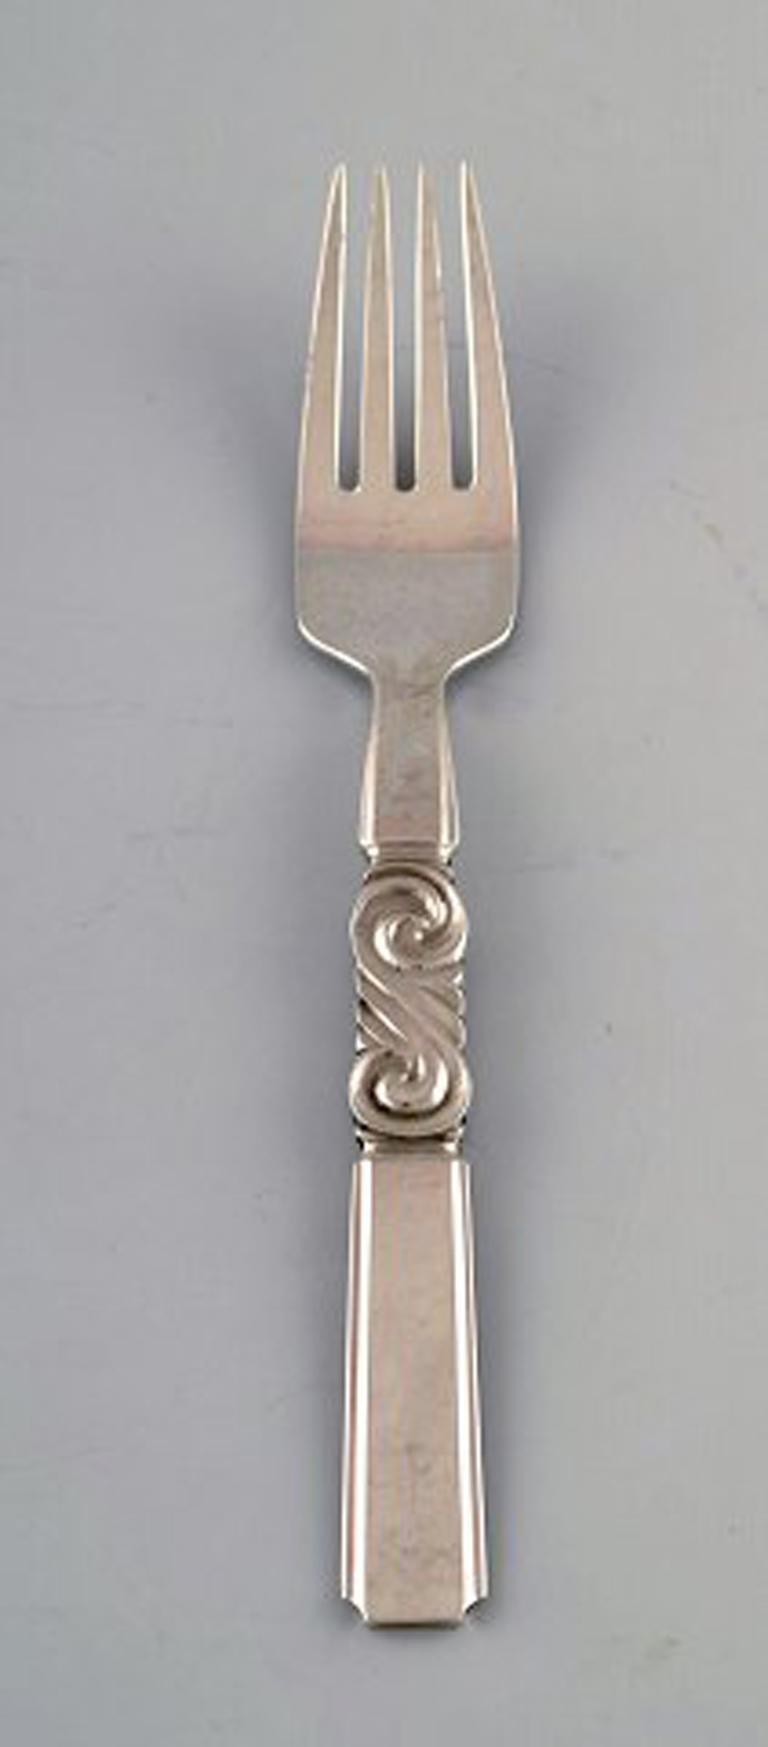 Georg Jensen. Cutlery, scroll no. 22, hammered sterling silver consisting of 6 dinner forks.
In perfect condition.
Stamped.
Measures: 18.4 cm.